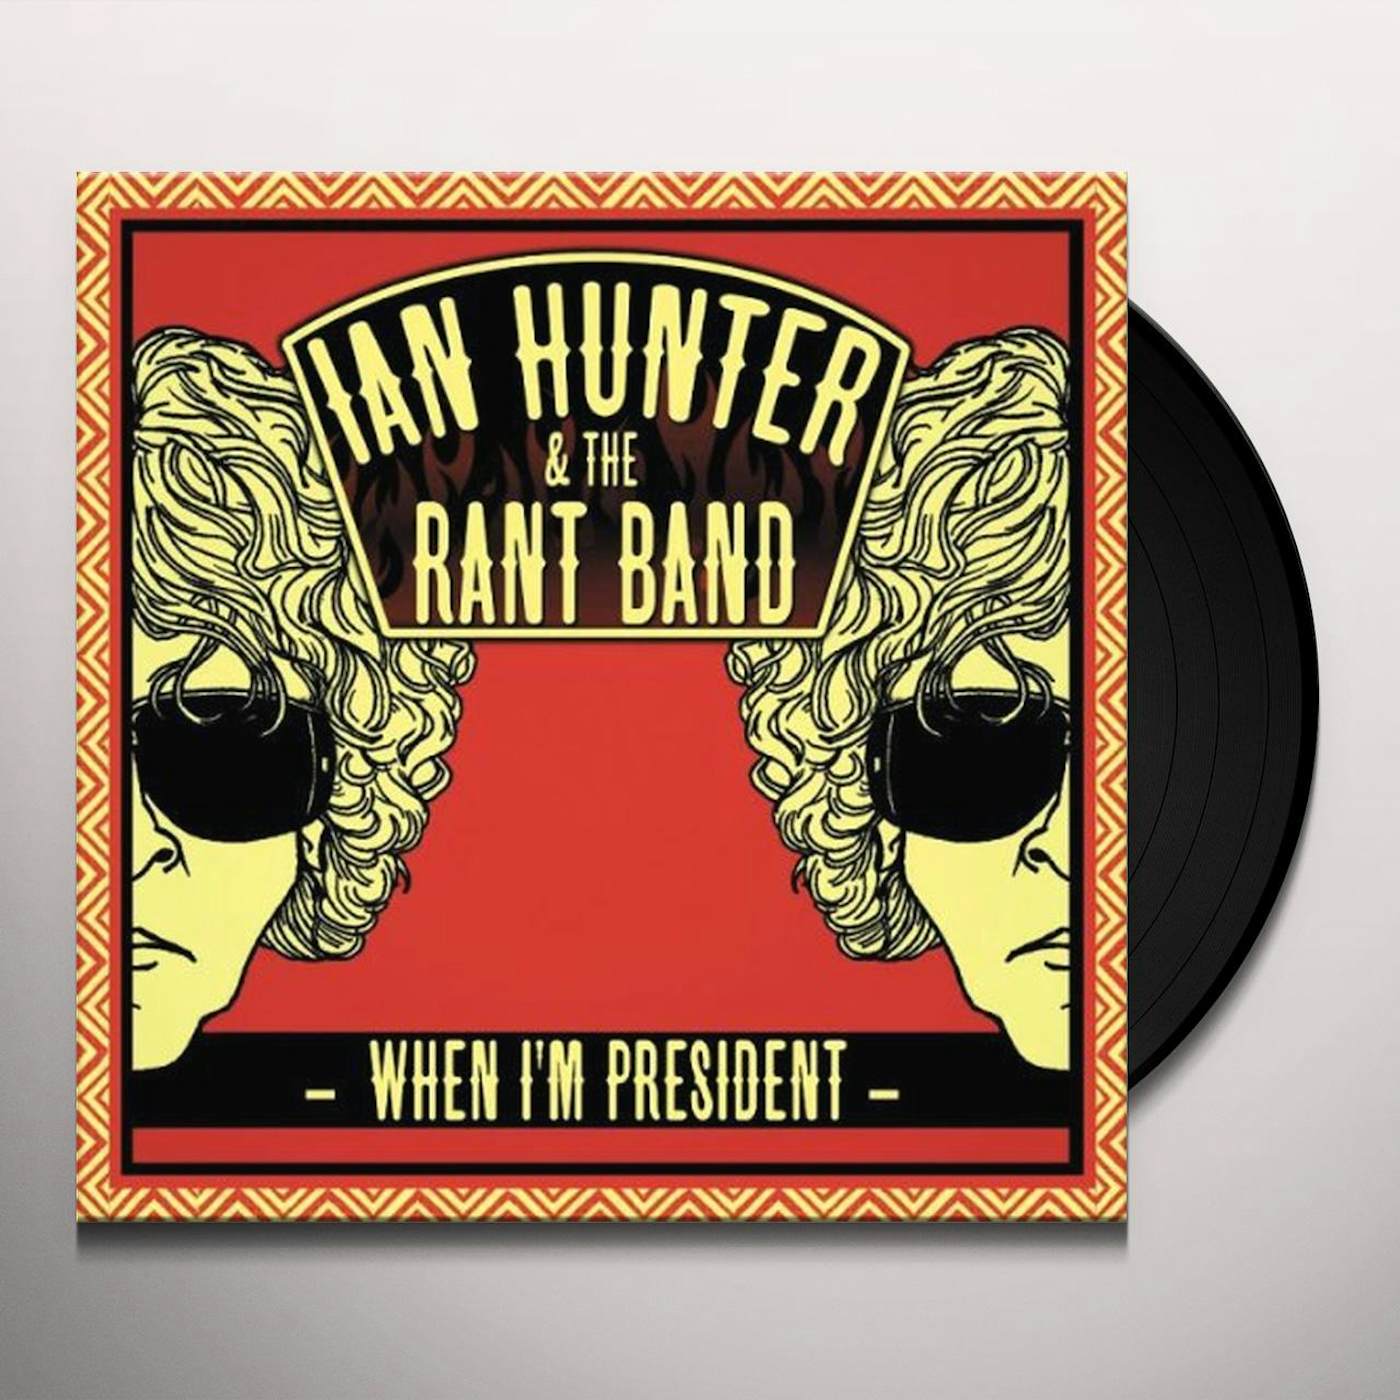 Ian Hunter And The Rant Band WHEN I'M PRESIDENT Vinyl Record - UK Release